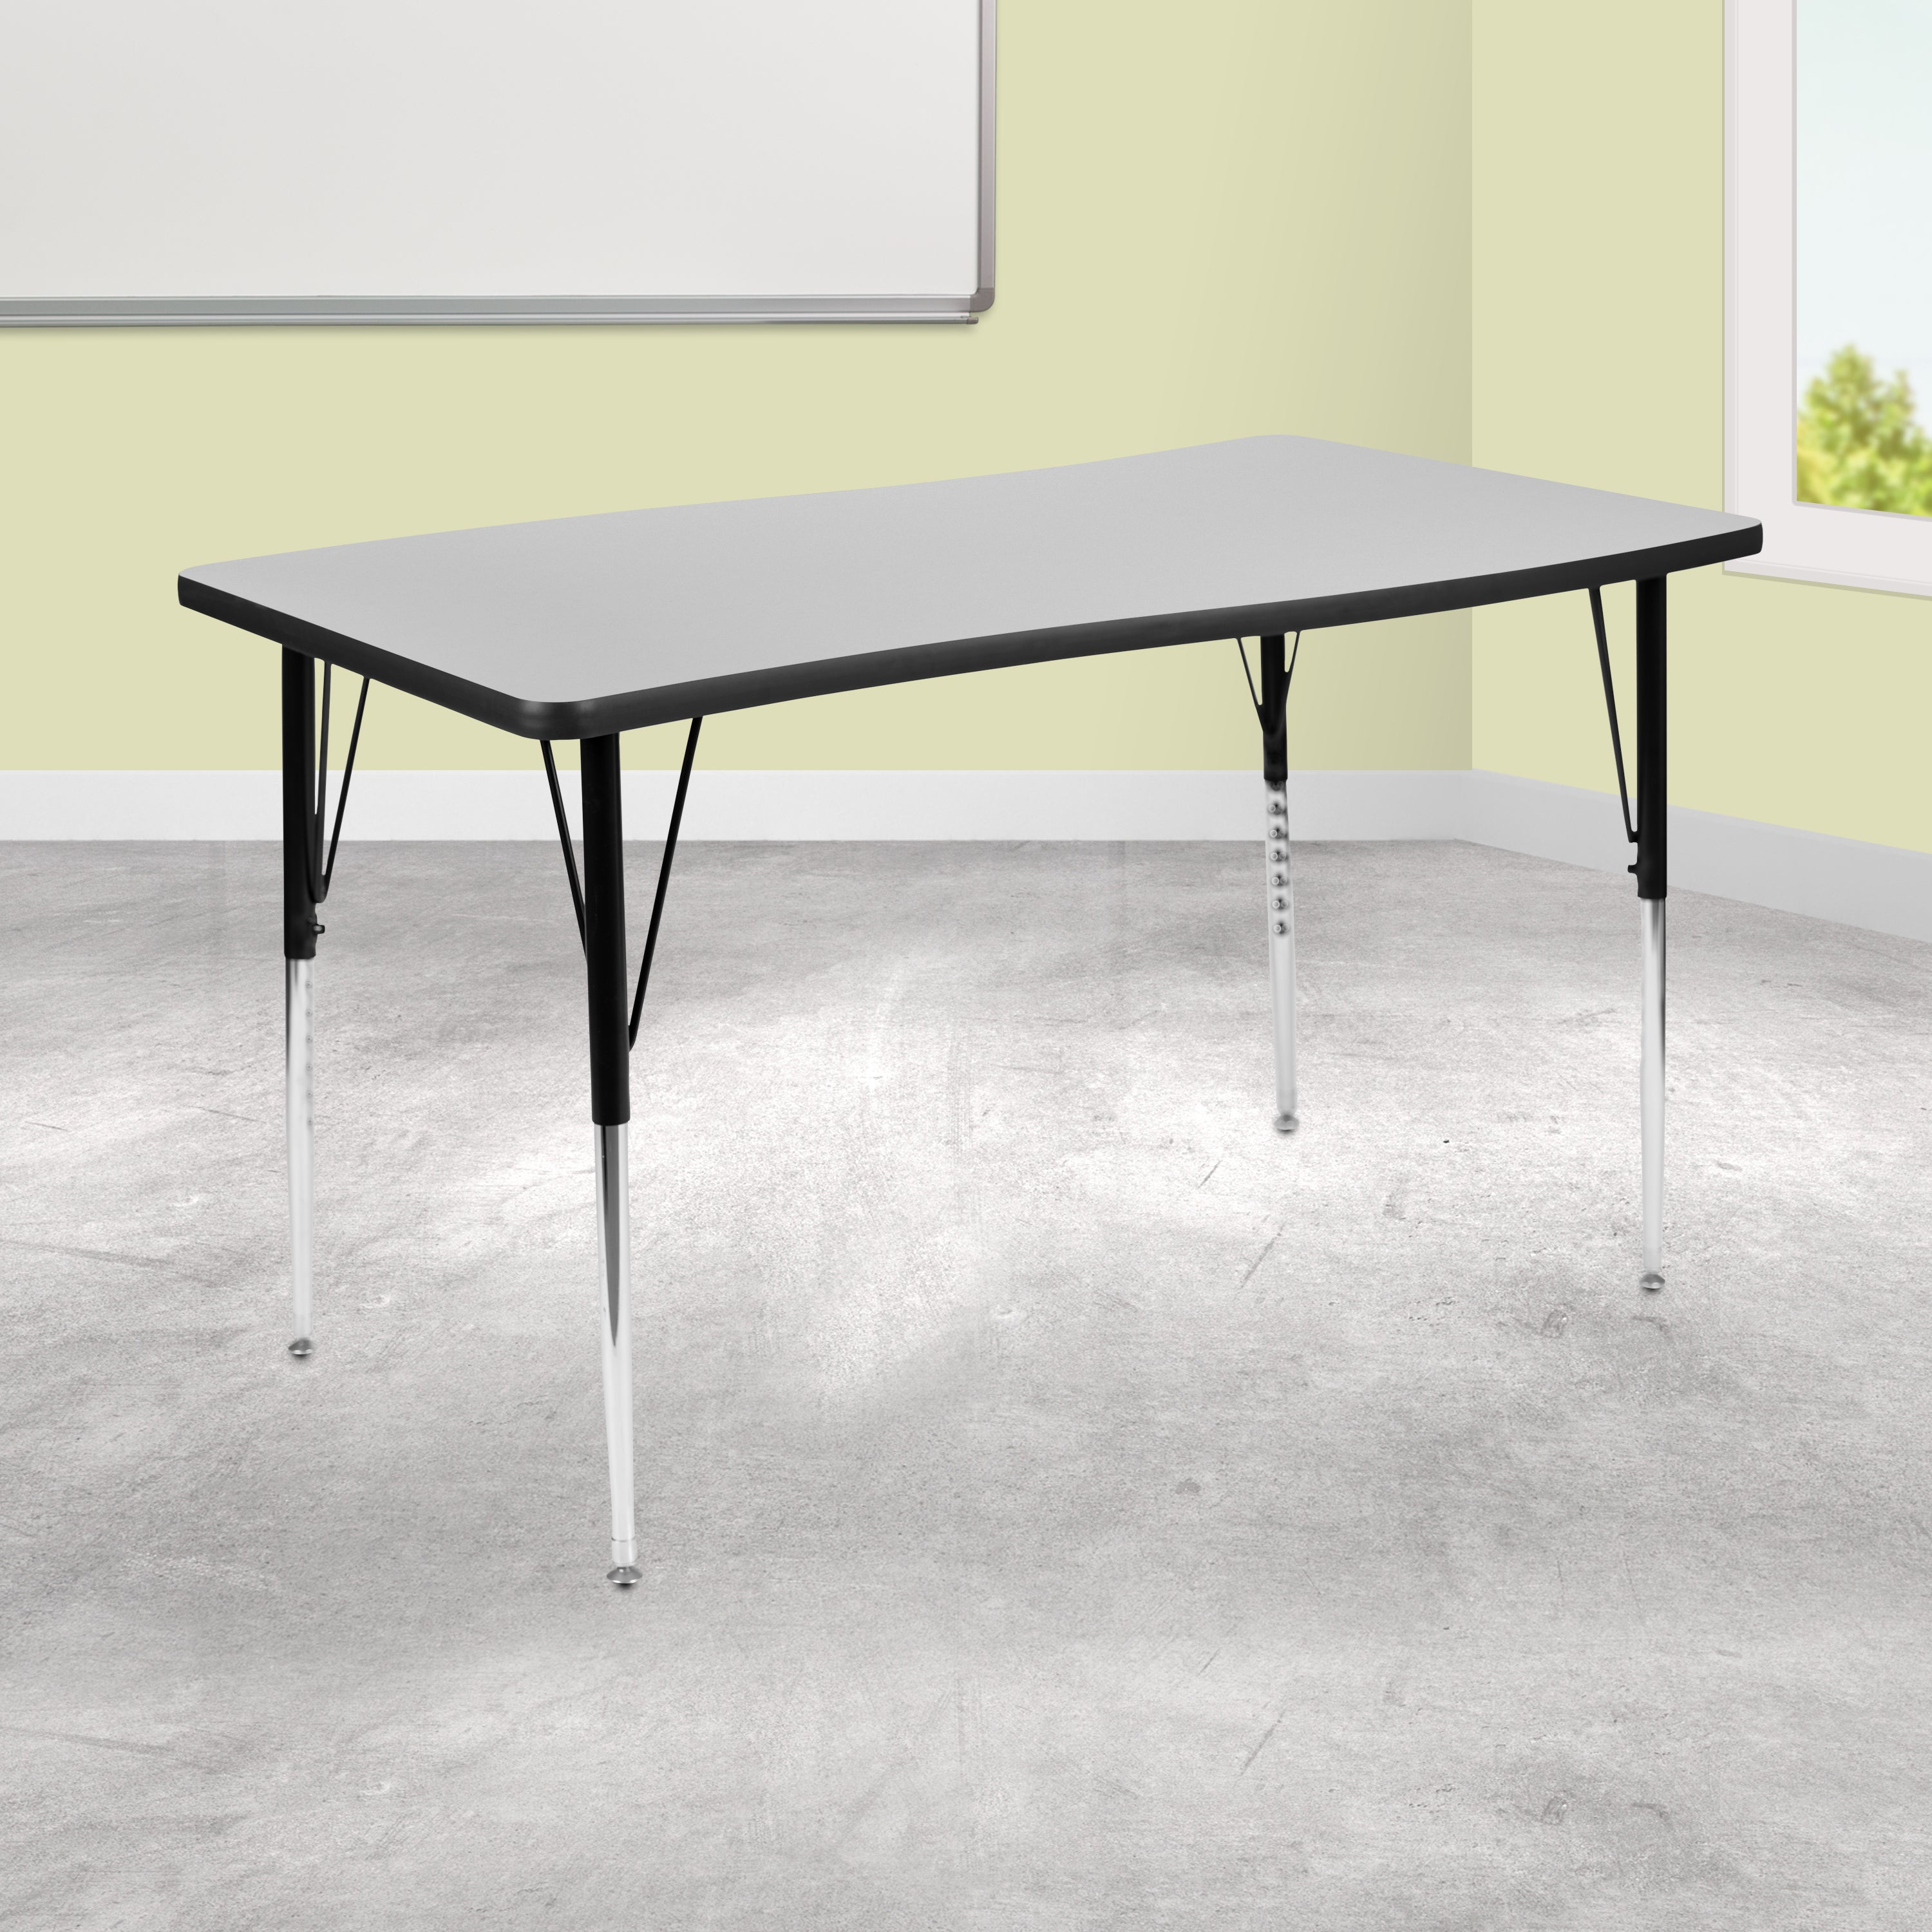 28"W x 47.5"L Rectangle Wave Flexible Collaborative Thermal Laminate Activity Table - Standard Height Adjustable Legs-Collaborative Rectangular Activity Table-Flash Furniture-Wall2Wall Furnishings